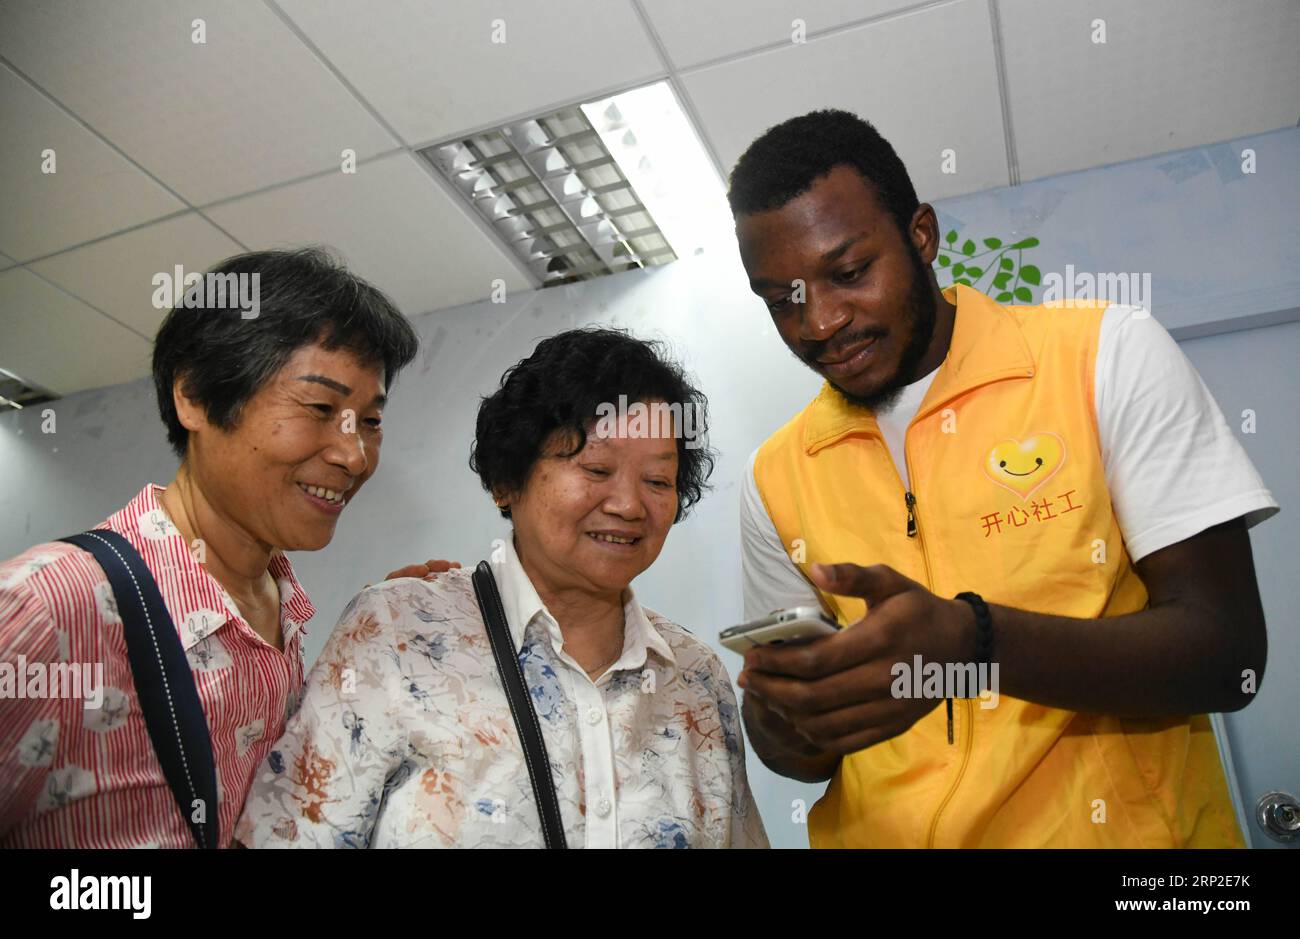 (180901) -- GUANGZHOU, Sept. 1, 2018 -- African student Kabey Heritier Lweny (1st R) helps Chinese senior citizens install a smartphone translation app in Guangzhou, south China s Guangdong Province, Aug. 29, 2018. Kabey, who comes from the Democratic Republic of Congo, came to Guangdong University of Technology as a Chinese language major about a year ago. The rich Chinese cuisine and culture have always appealed to him, but it s by taking part in various volunteer activities that has made him embrace the life in Guangzhou ever more closely. I grew to learn more about the Chinese traditions a Stock Photo